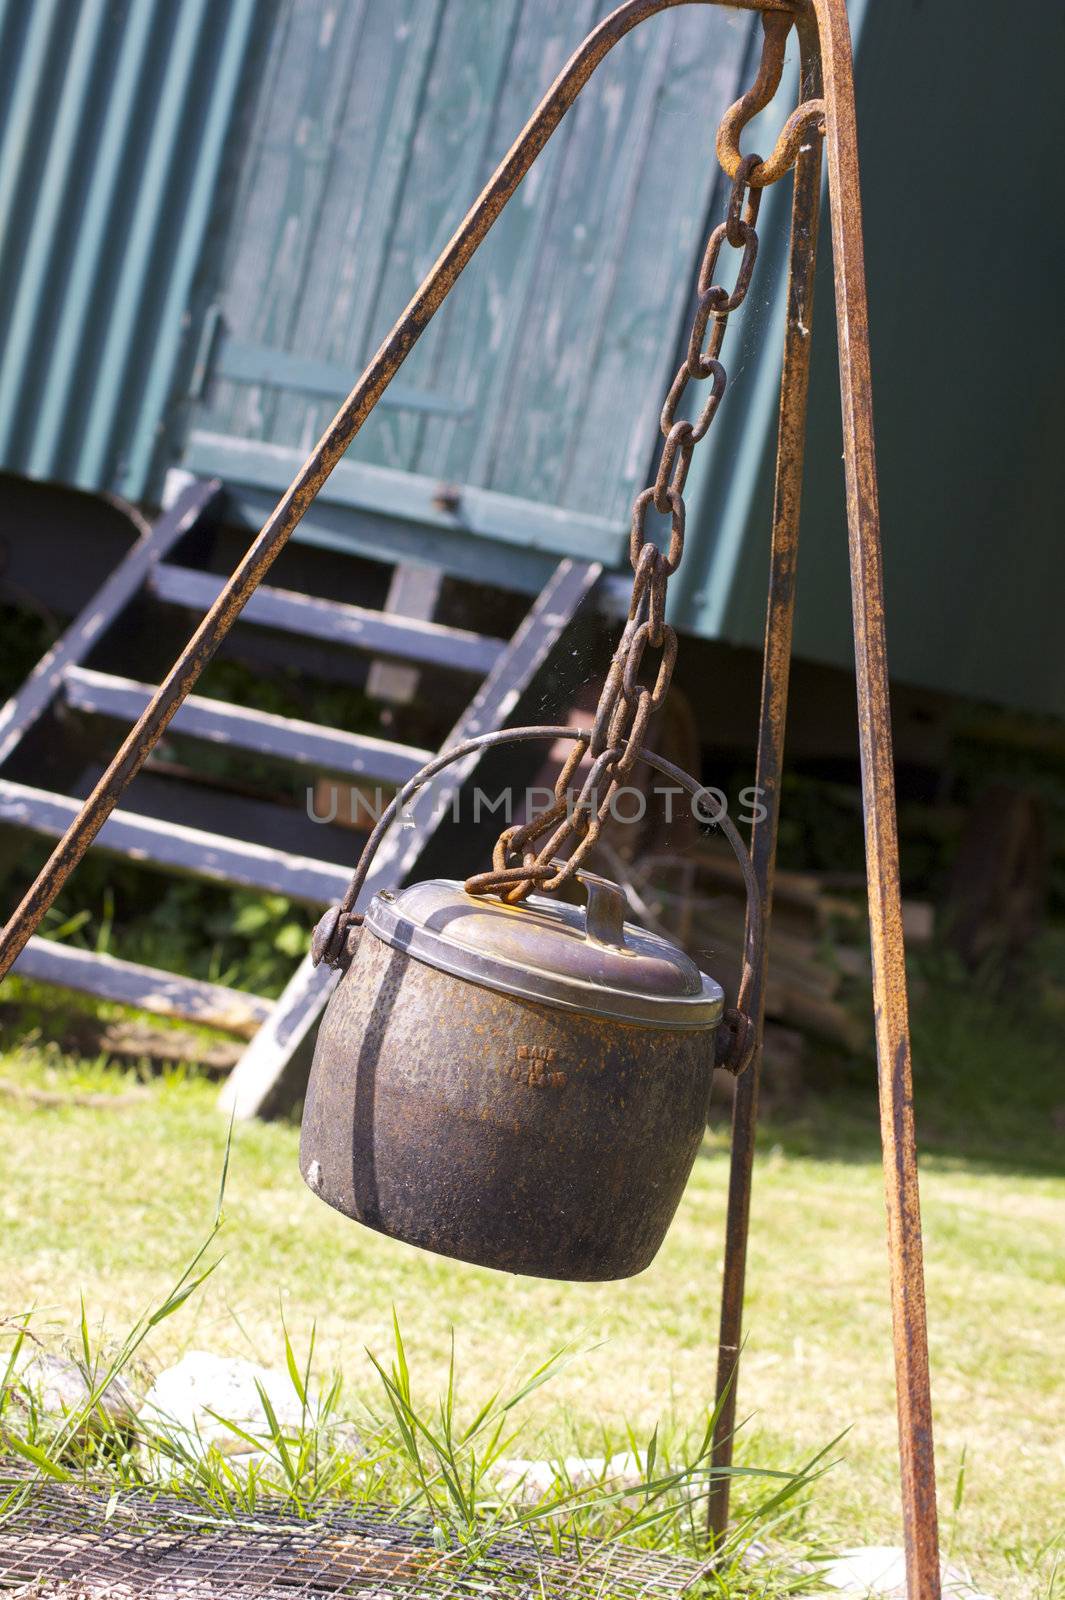 A rusty metal cauldron hanging over an open fire space within a rusty metal frame, hook and chain, set in front of the wooden steps of a green painted tin constructed shepherds hut. Located in rural Dorset, England.